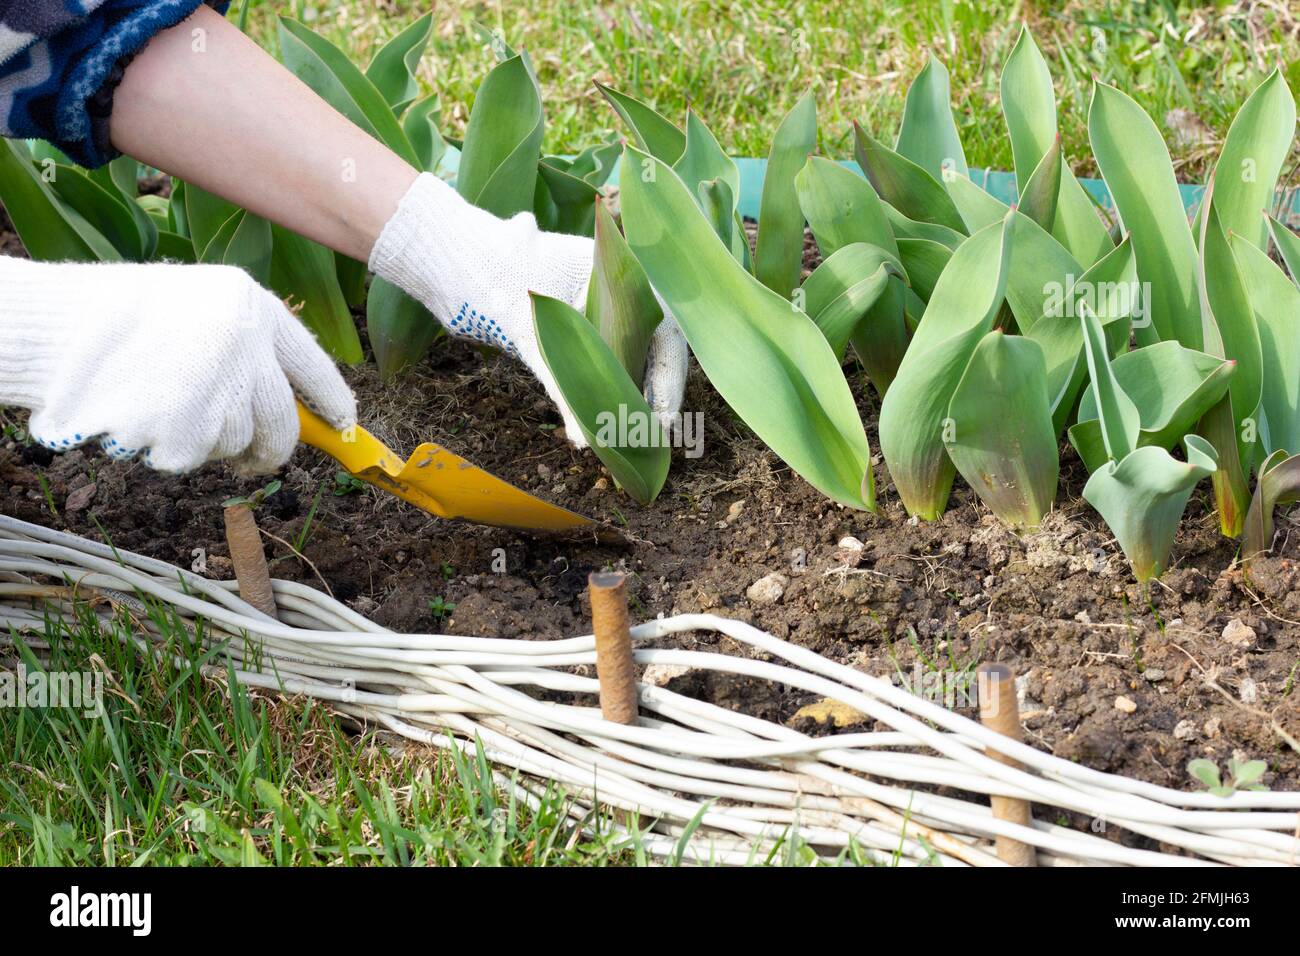 close on the hands of a man planting seedlings salad in a vegetable garden Stock Photo